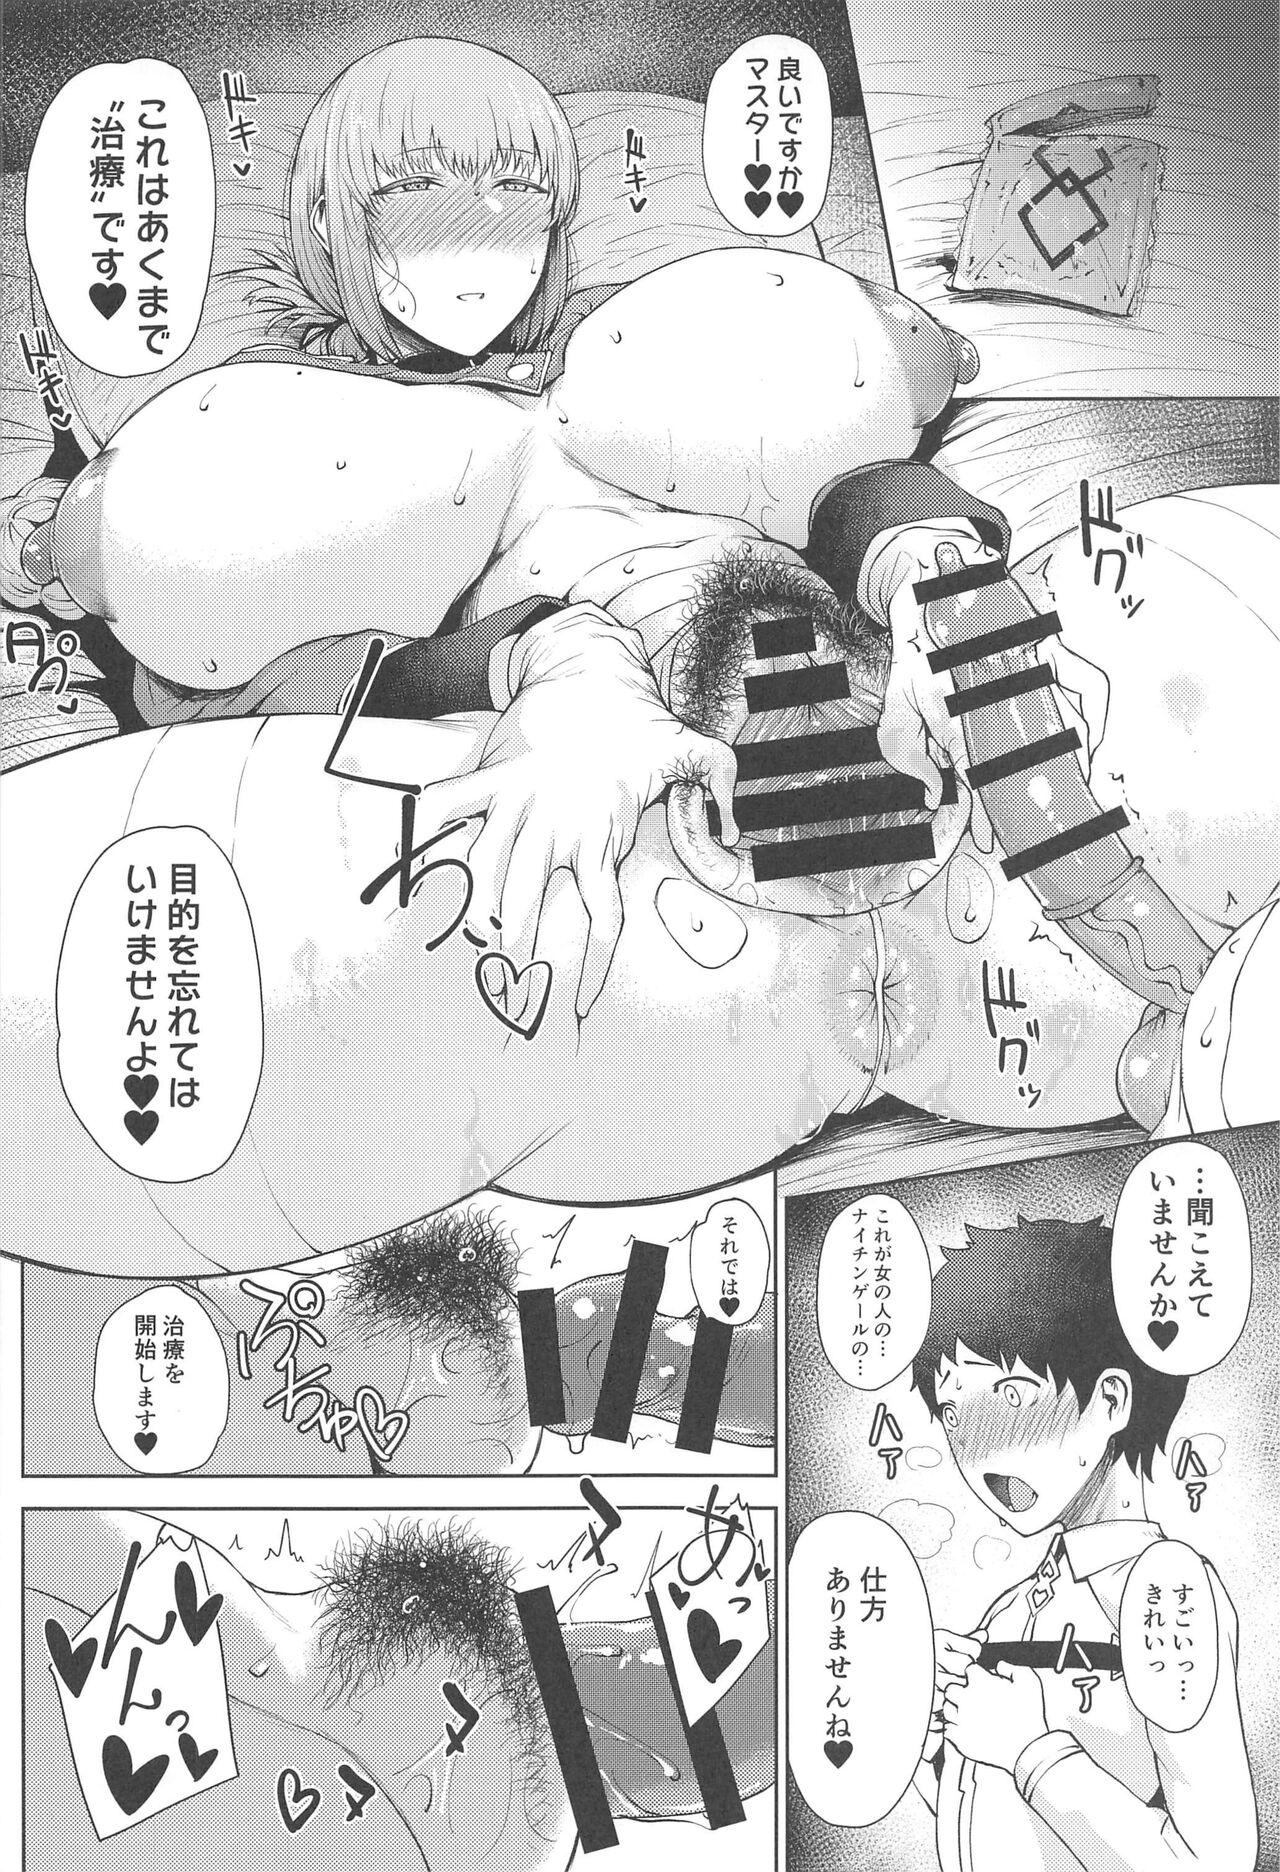 Anal Licking Chiryou desu - Fate grand order Family Taboo - Page 7